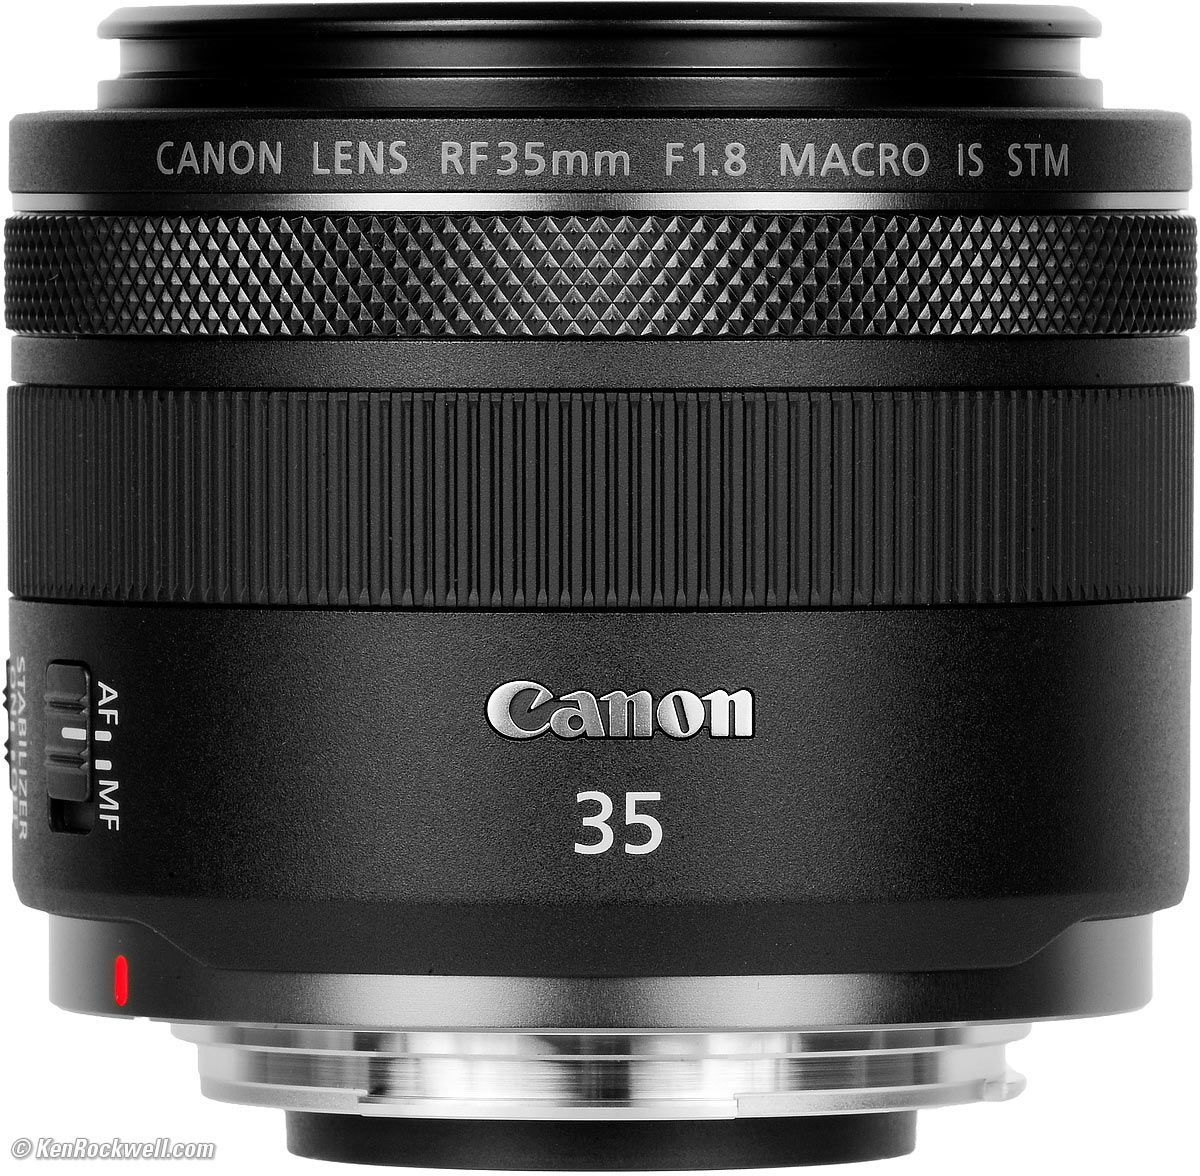 Canon RF 35mm f/1.8 Macro Review